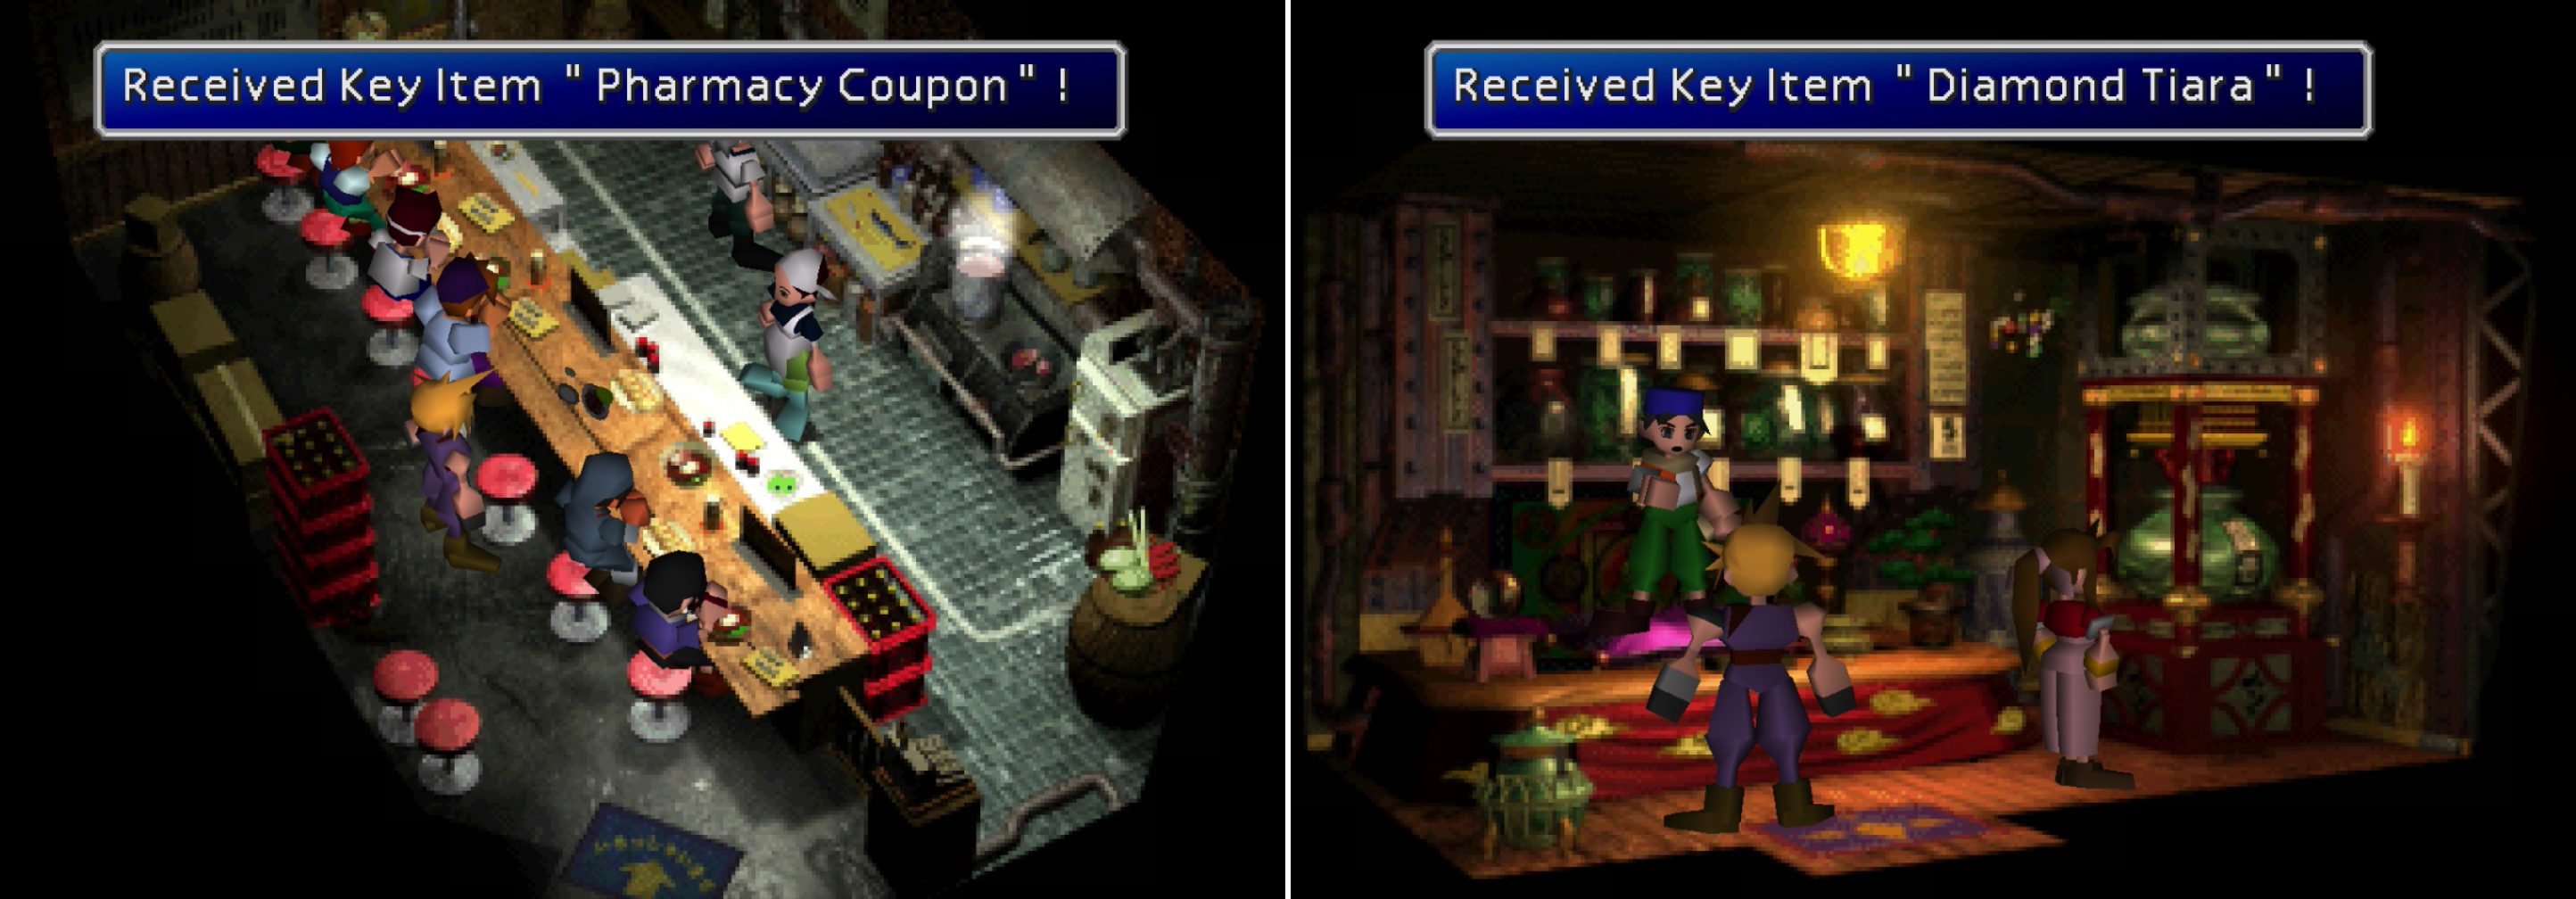 Buy a meal at the restaurant to get a "Pharmacy Coupon", which can be traded for some useful medicine (left). Depending on what you purchase from the inn's vending machine, the owner of the Materia shop will give you a tiara (right).